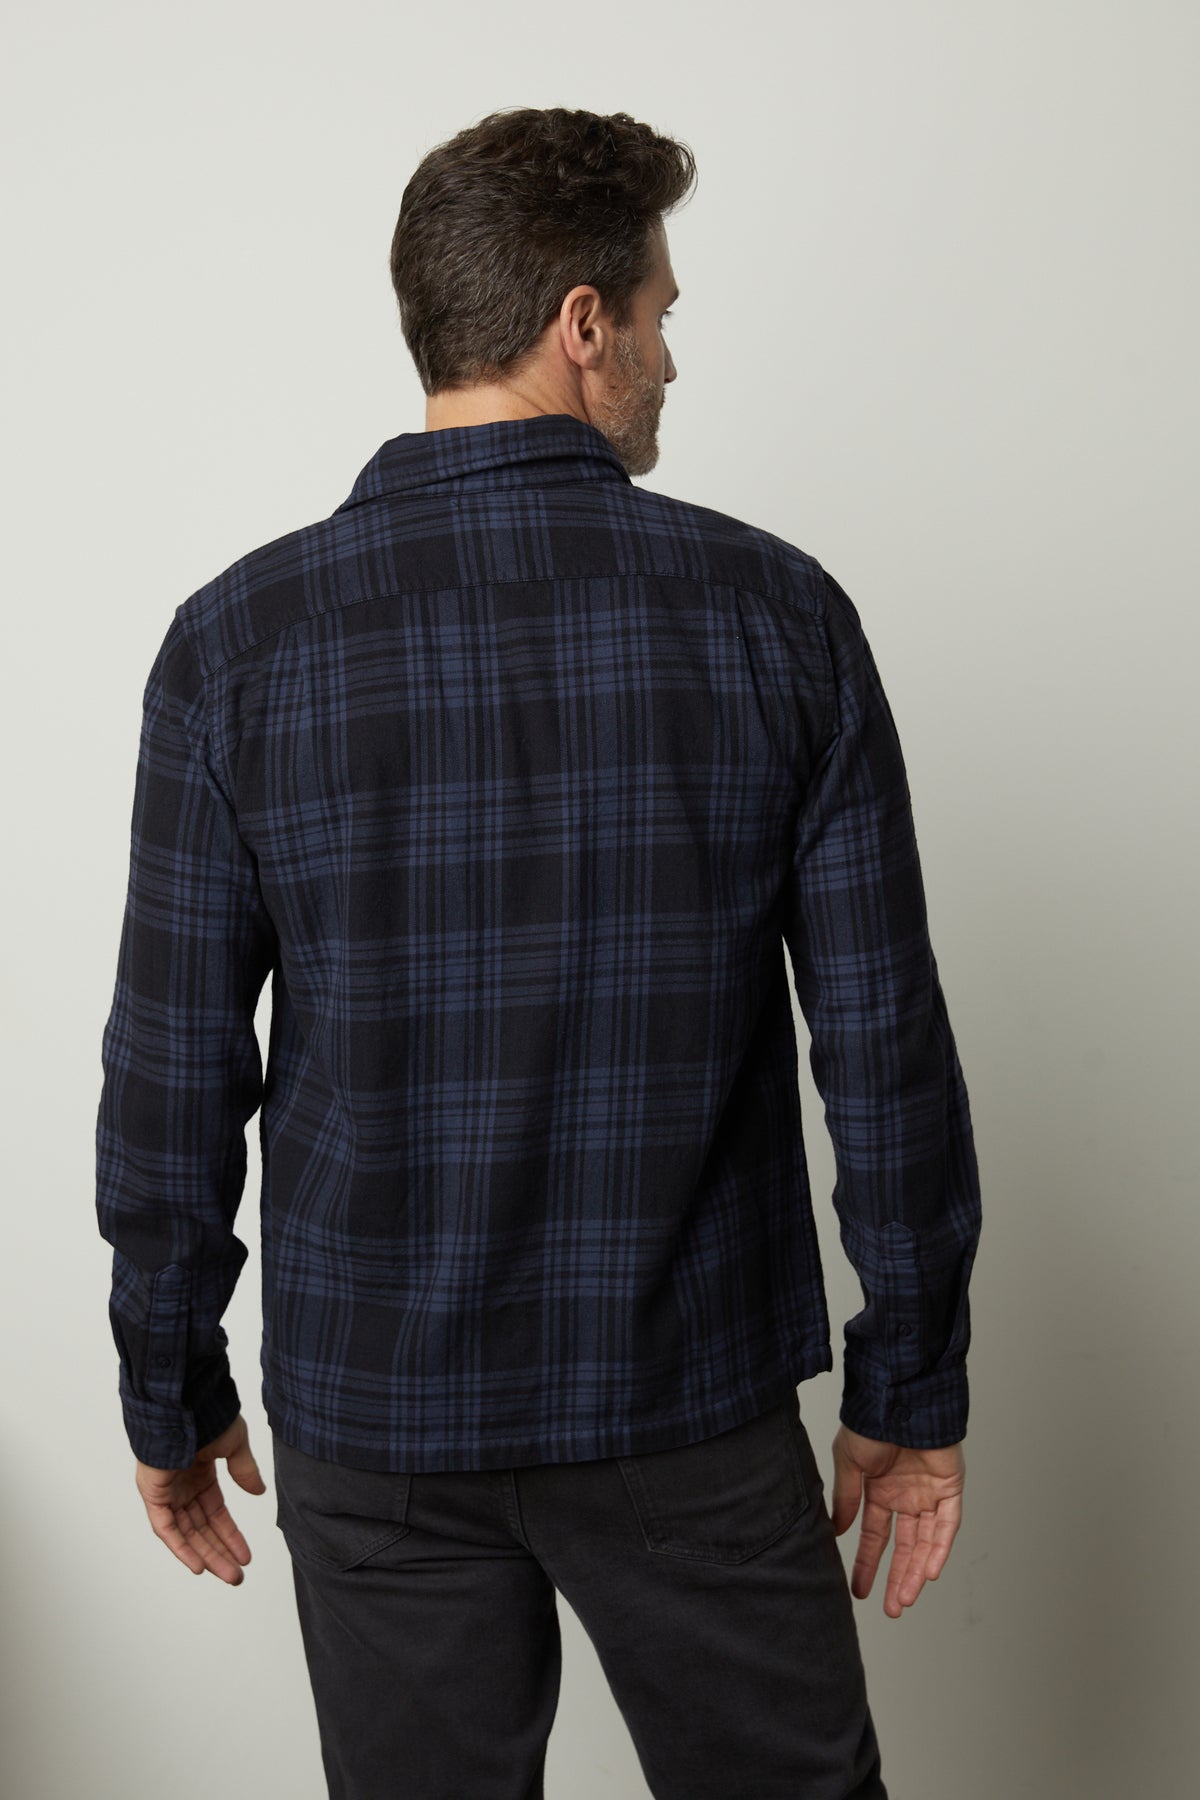 The back view of a man wearing a Velvet by Graham & Spencer FREDDY PLAID SHIRT.-35662725480641